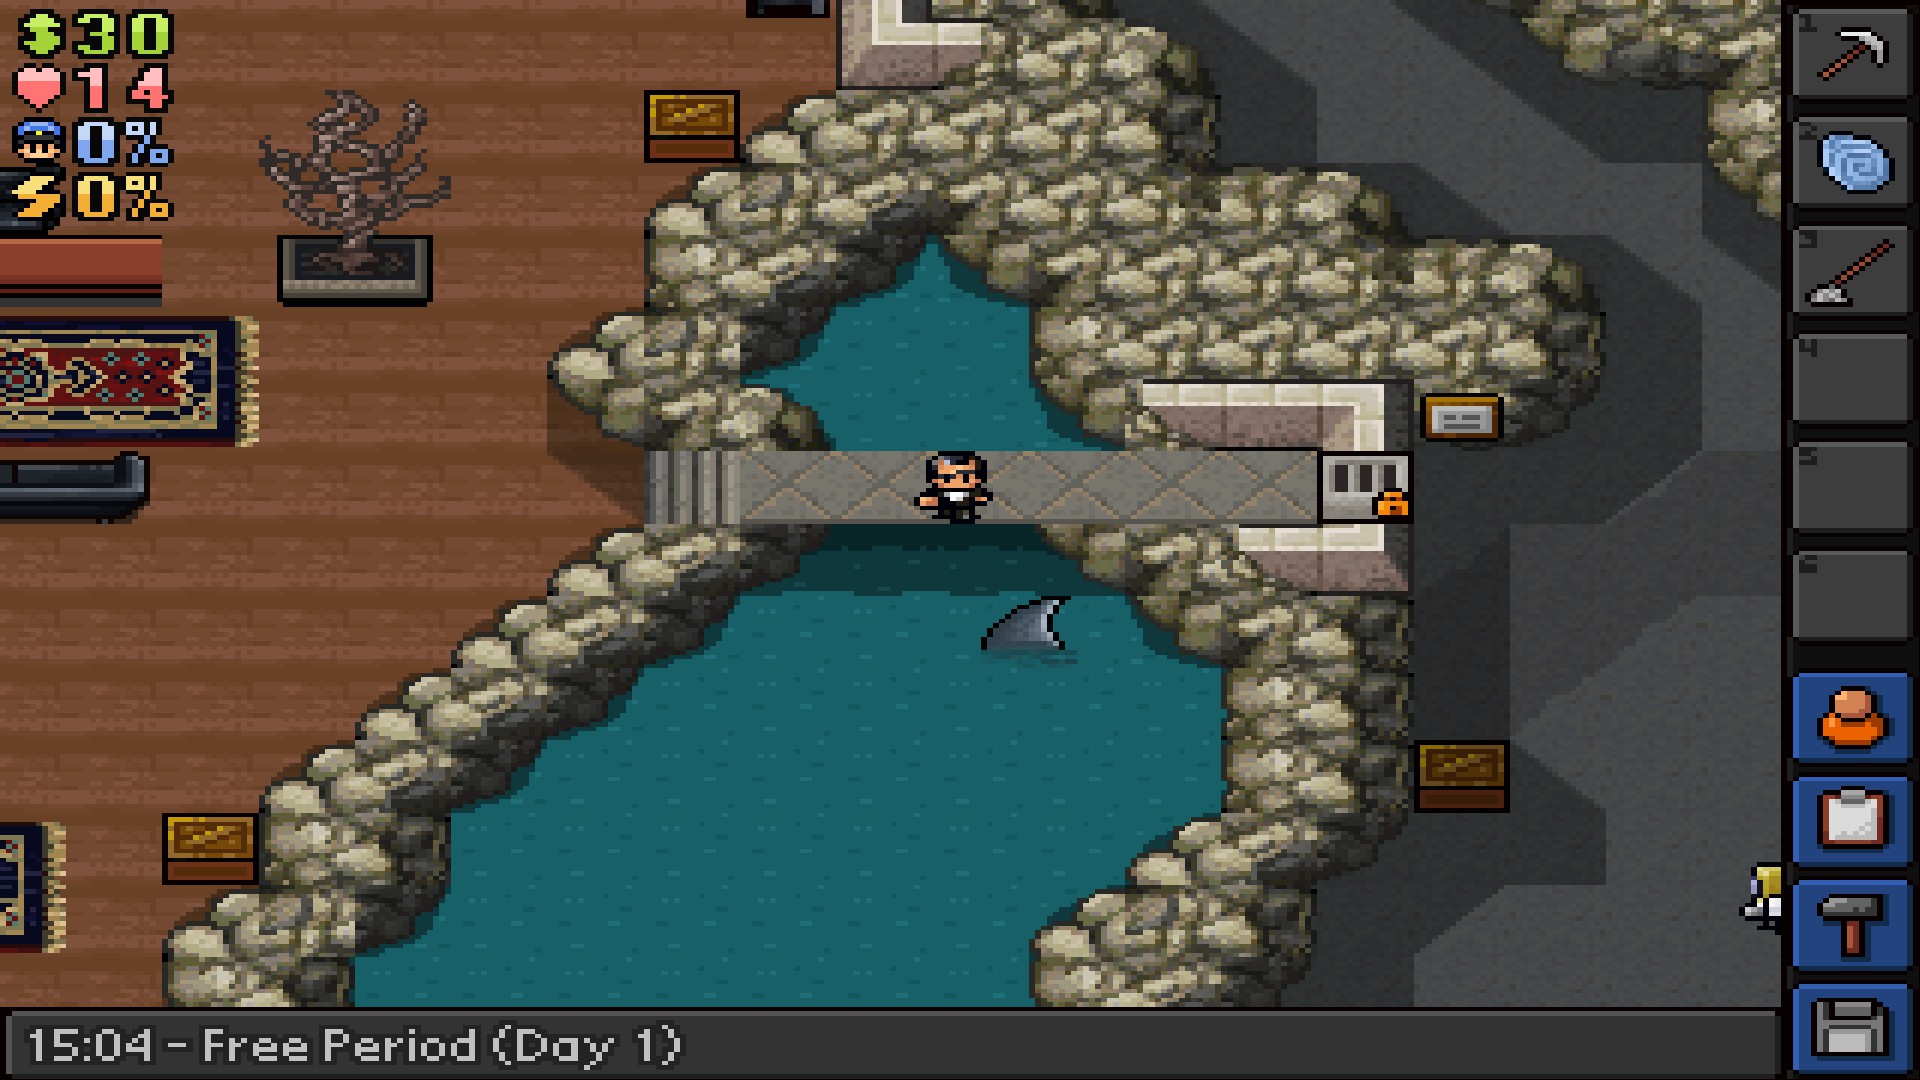 The Escapists - Duct Tapes are Forever screenshot